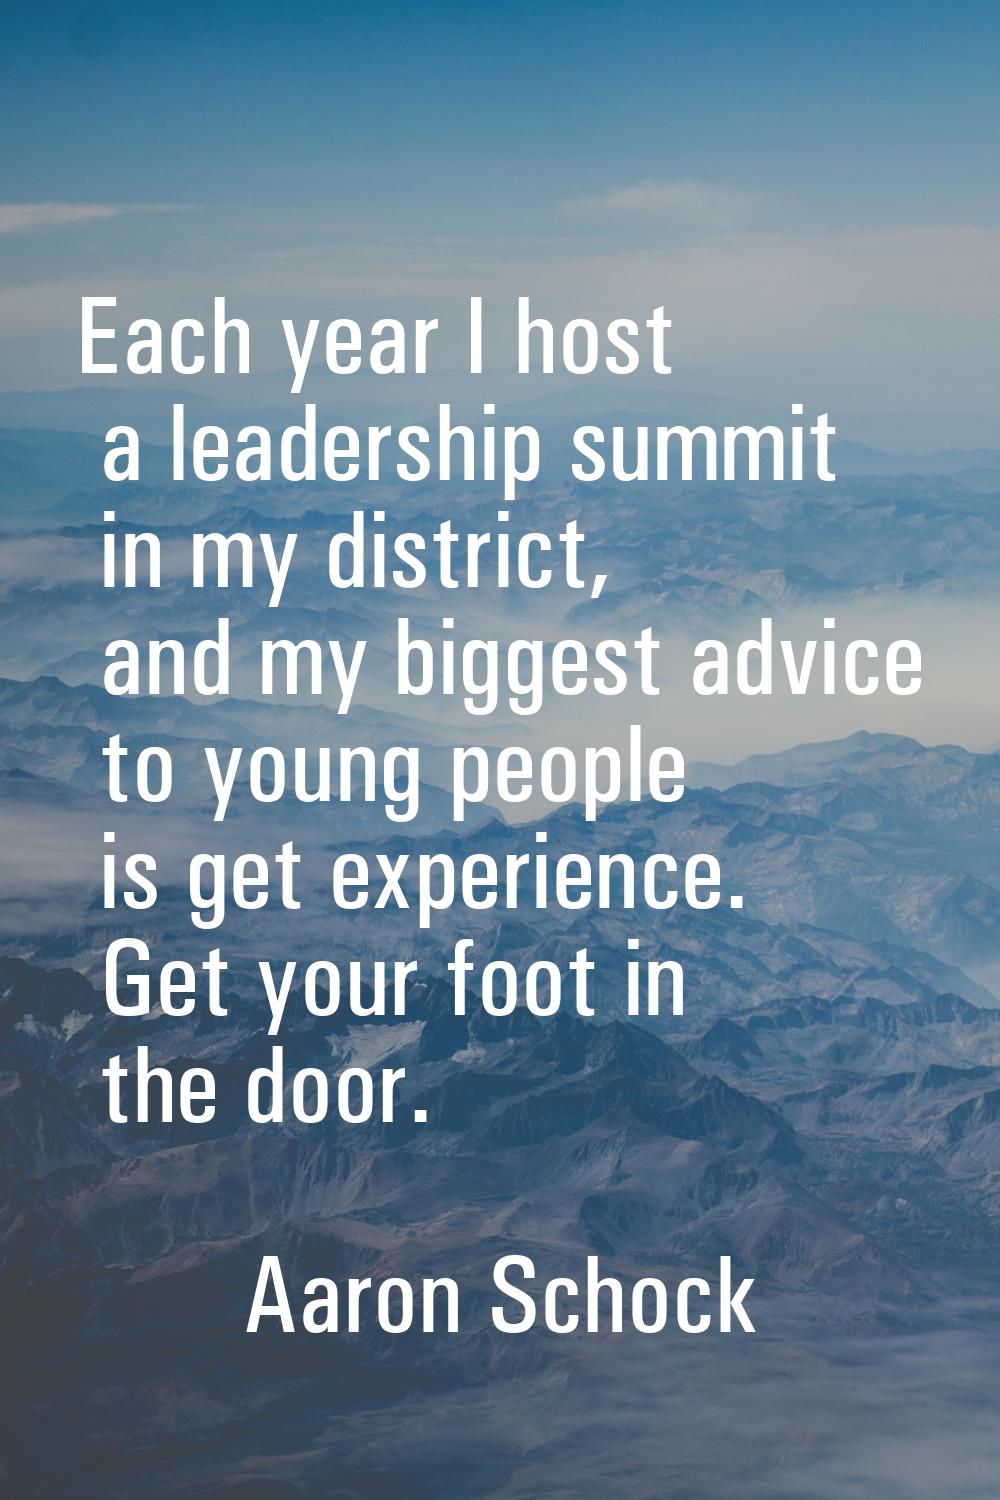 Each year I host a leadership summit in my district, and my biggest advice to young people is get e